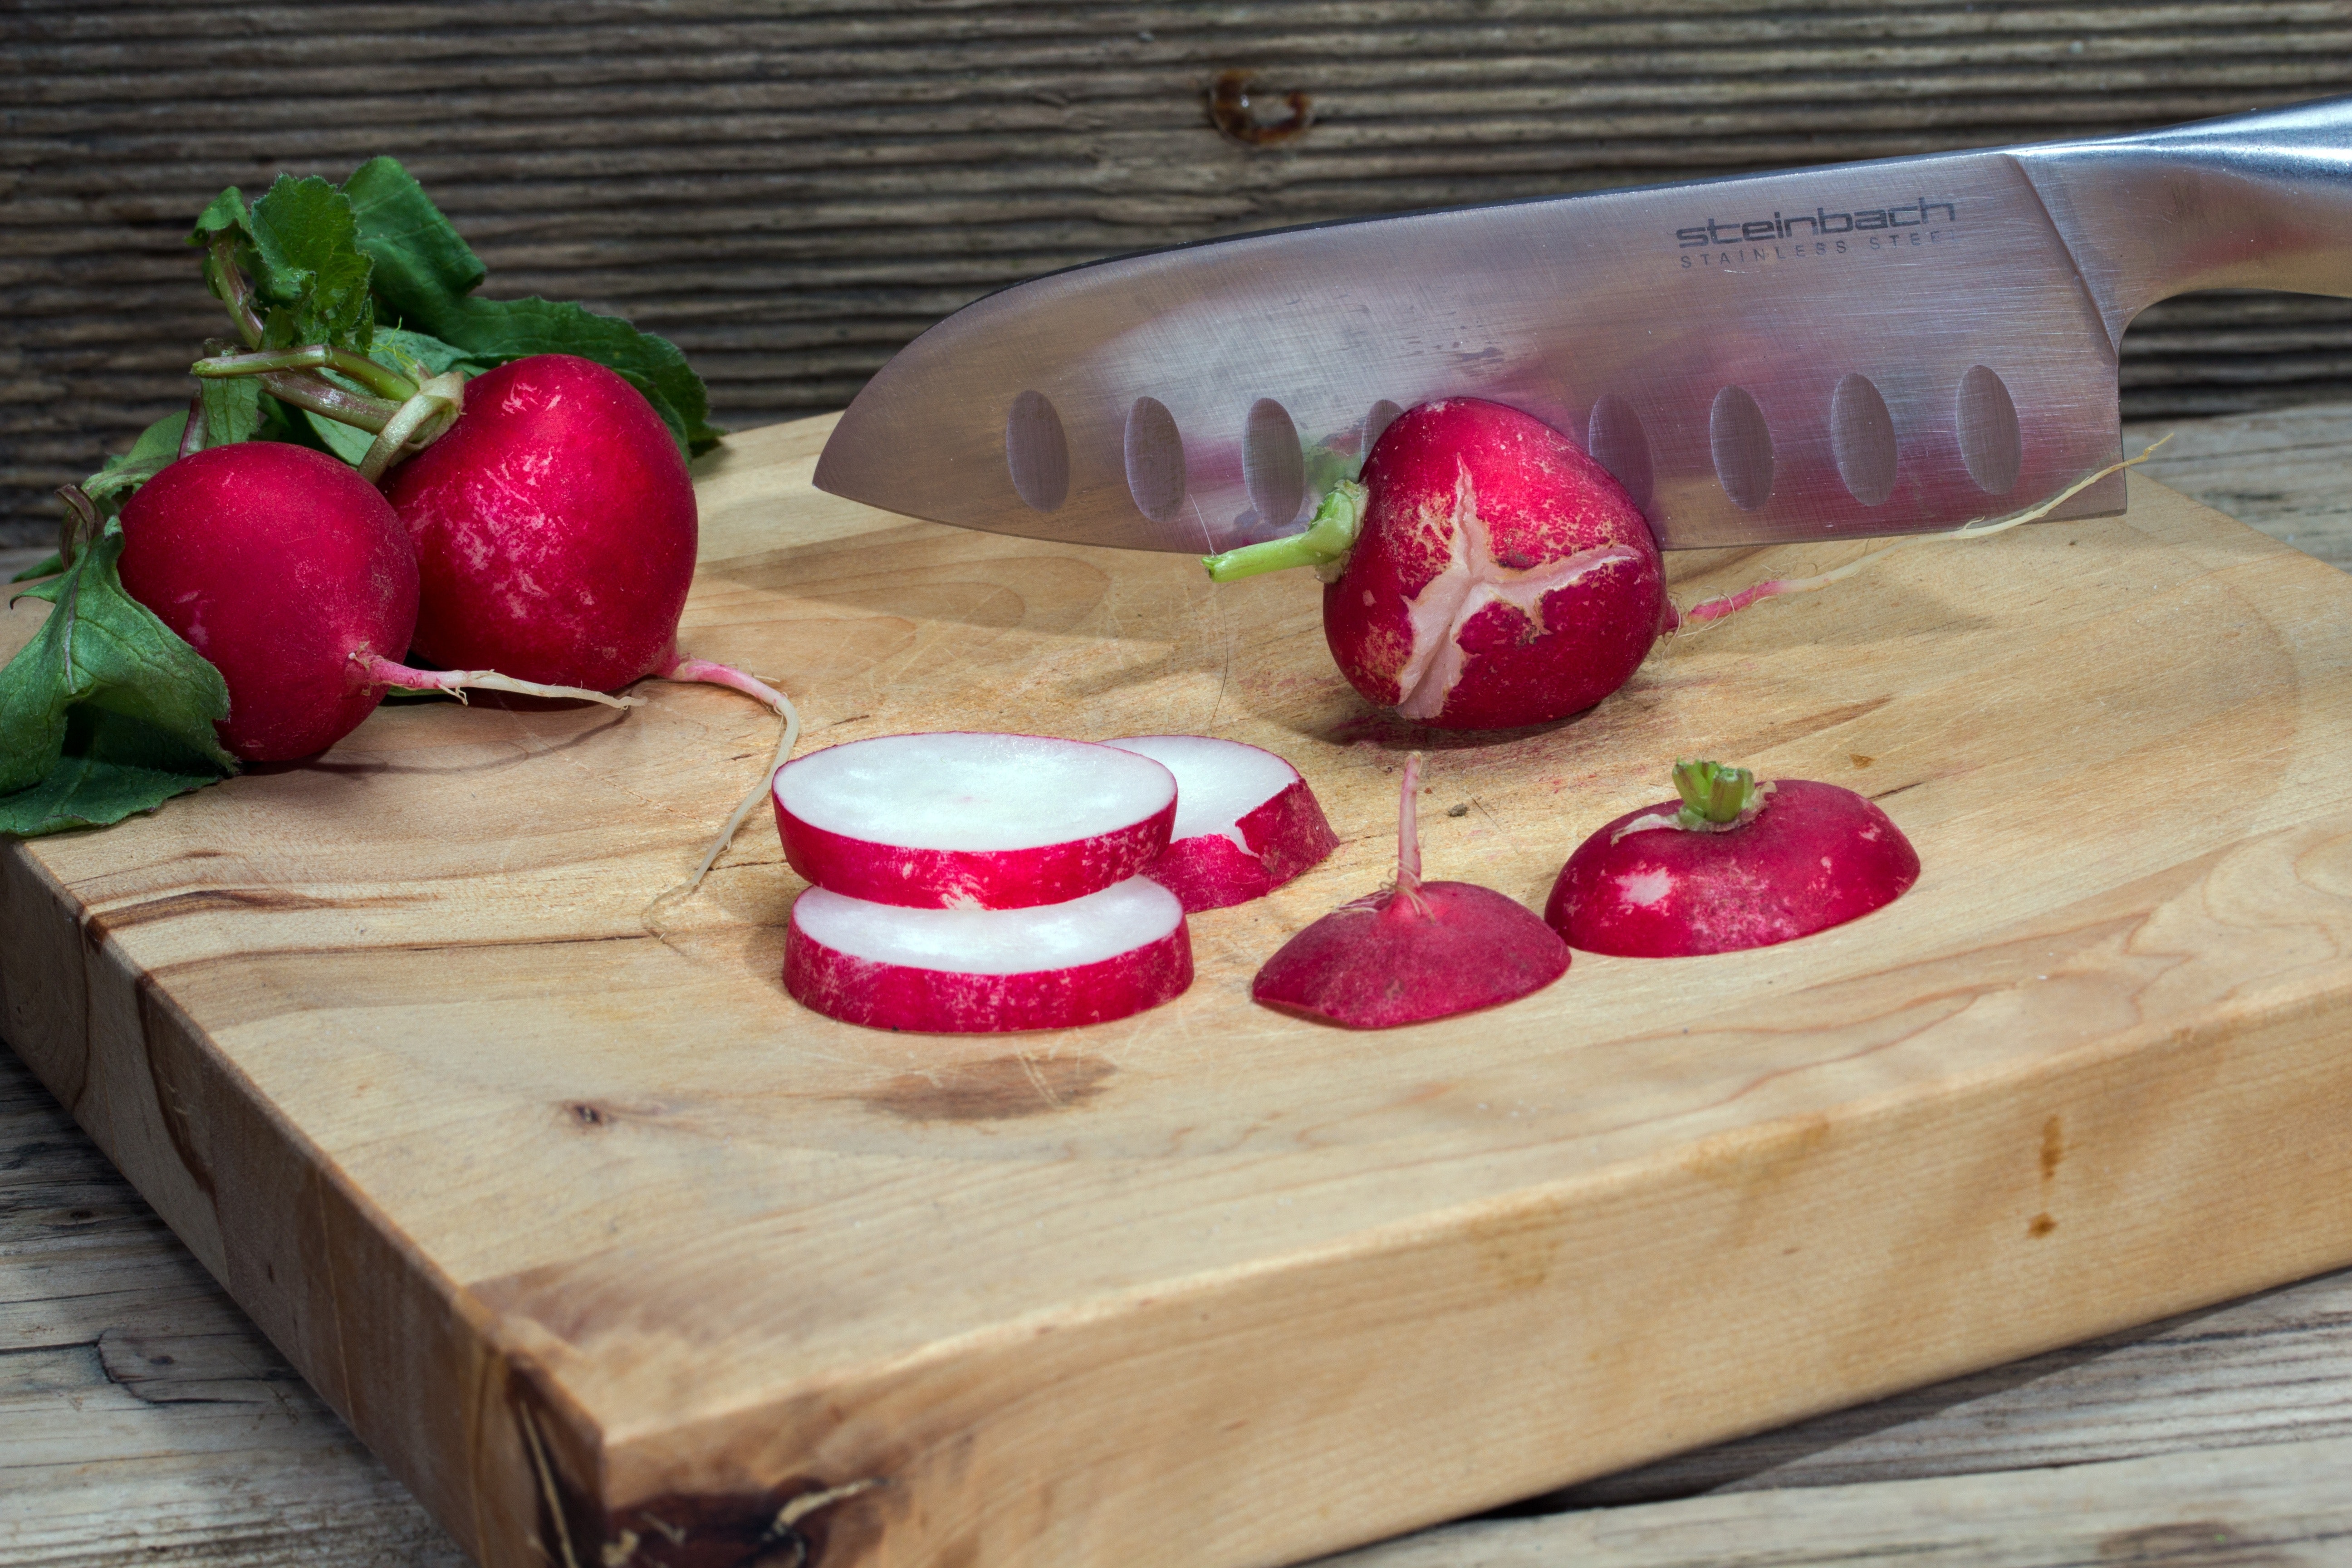 Sliced Radish on Brown Wooden Chopping Board, Board, Radishes, Wood, Vegetables, HQ Photo